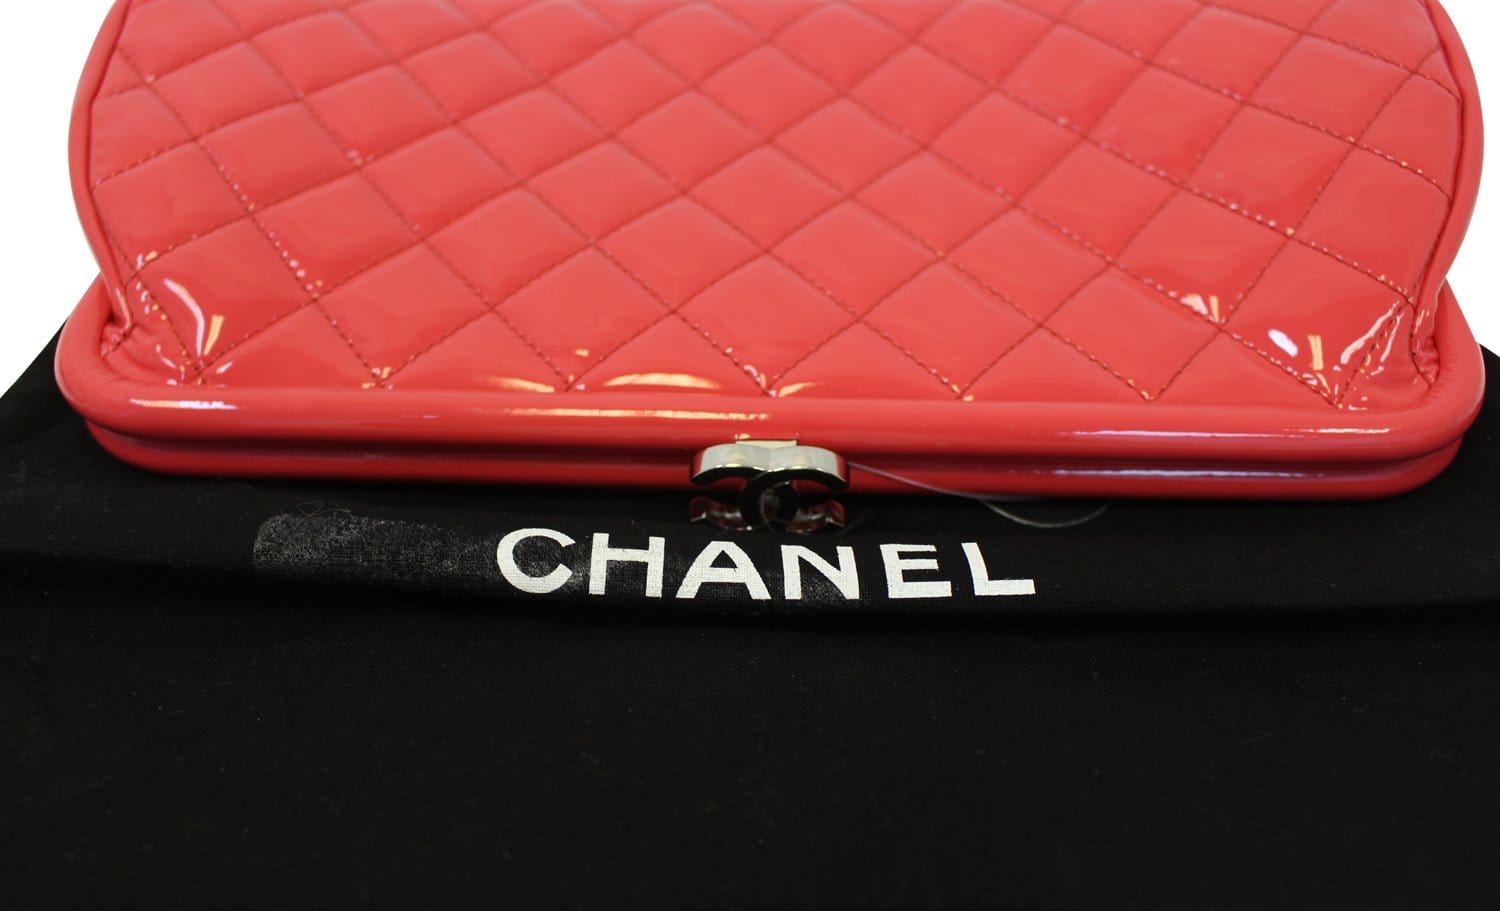 CHANEL Pink Quilted Leather Timeless Clutch Bag - Final Call